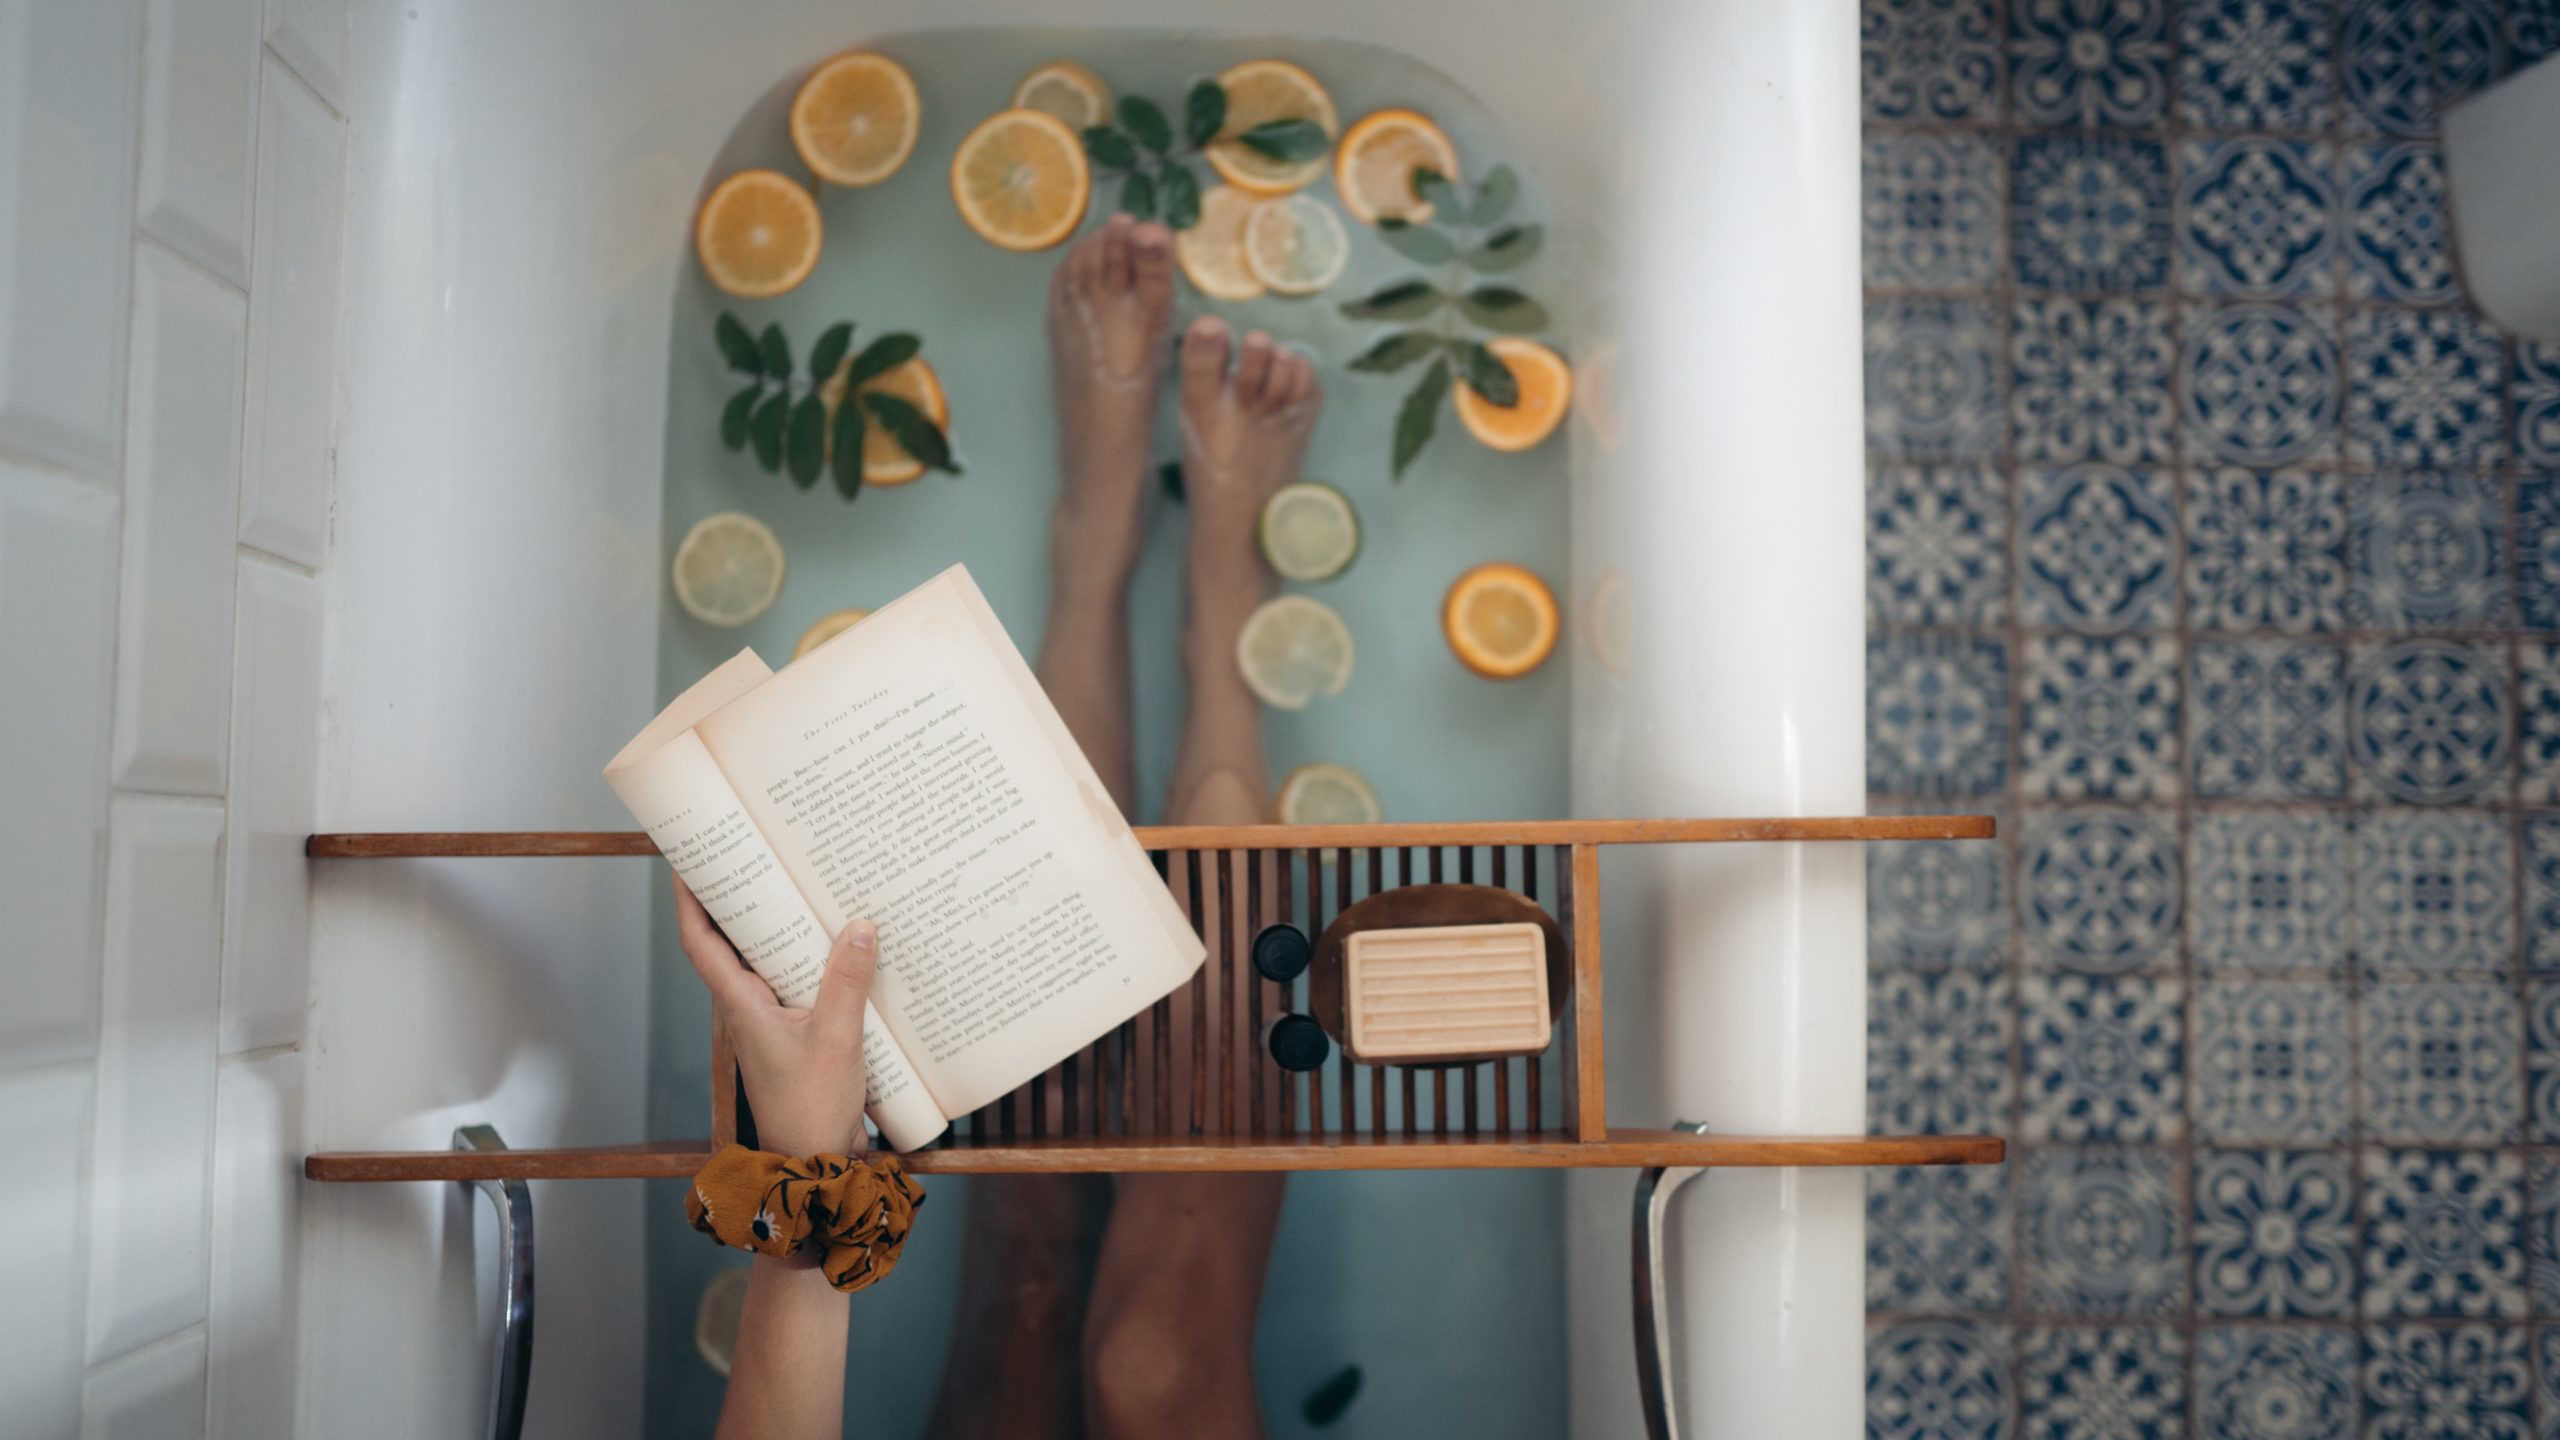 An arial shot of a woman in a bath, just her legs and arm visible. The water has lemon slices in it and she's reading a book on a wooden stand.